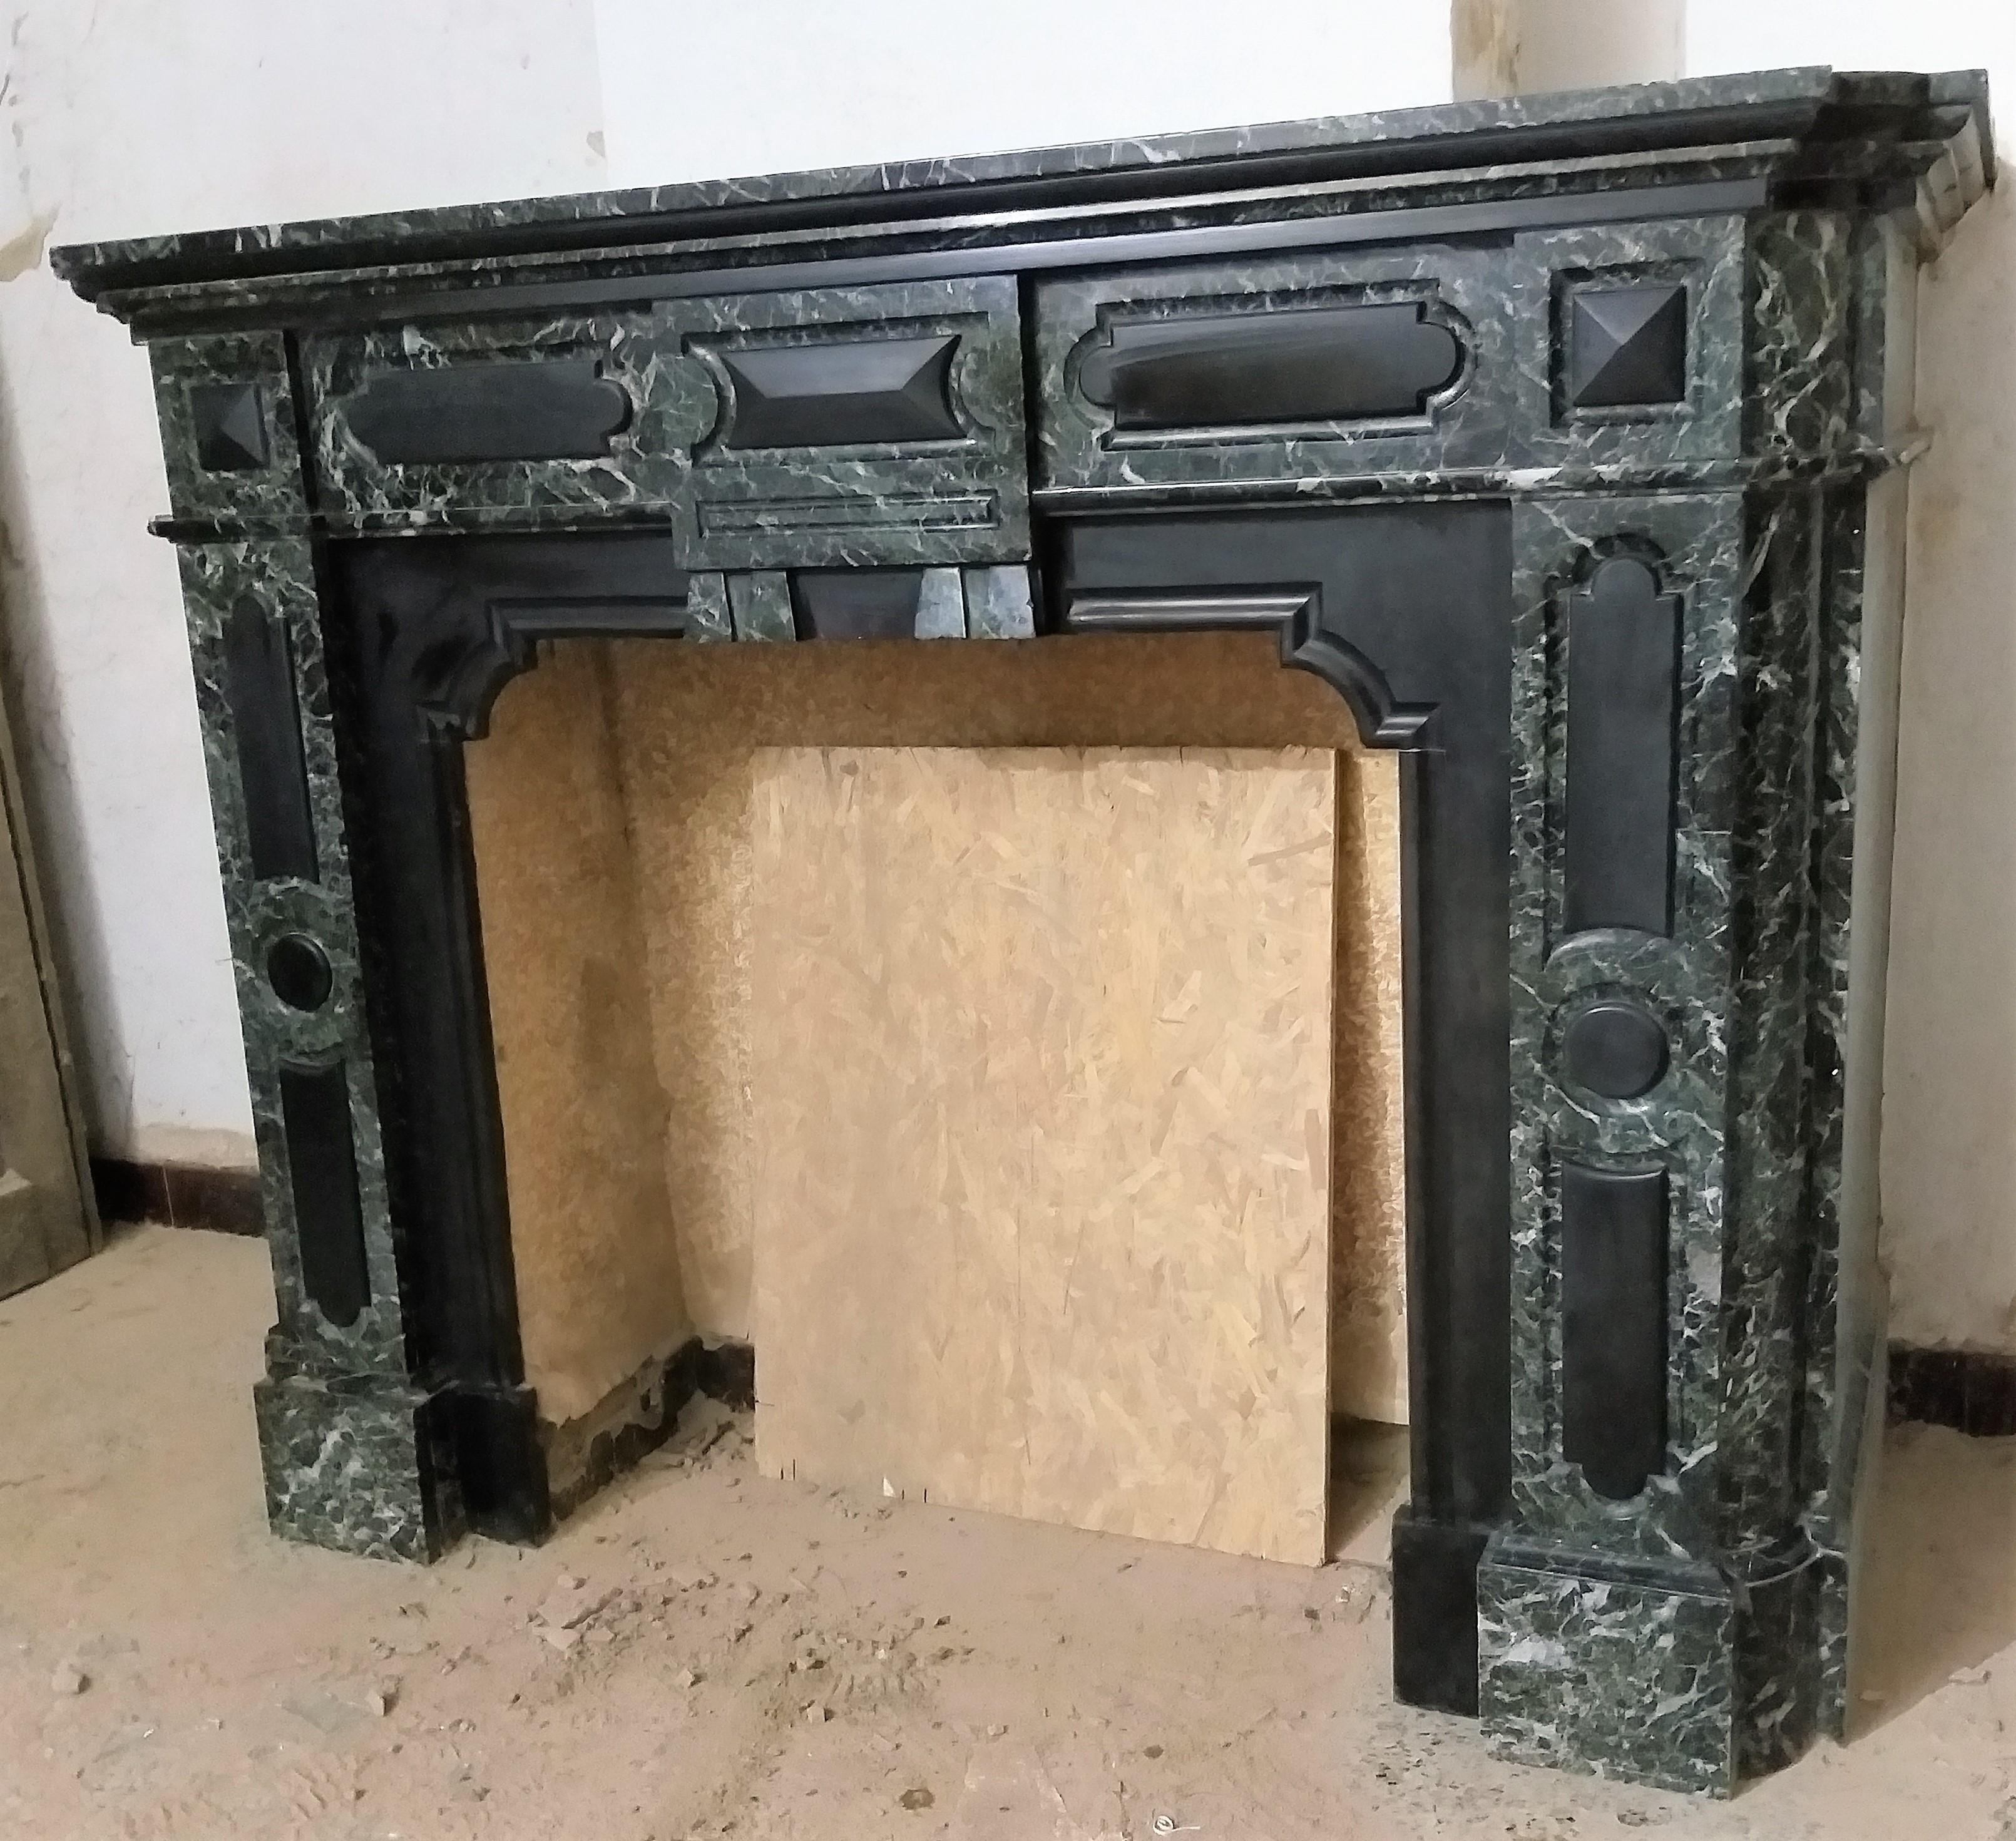 The double moulded breakfront shelf is resting on a boldly carved, Verde Antico fireplace. Enhanced with Belgian Noir de Mazy marble, foyer and panels. The round cornered jambs are making a stylish, massive impression. Removed from a building in